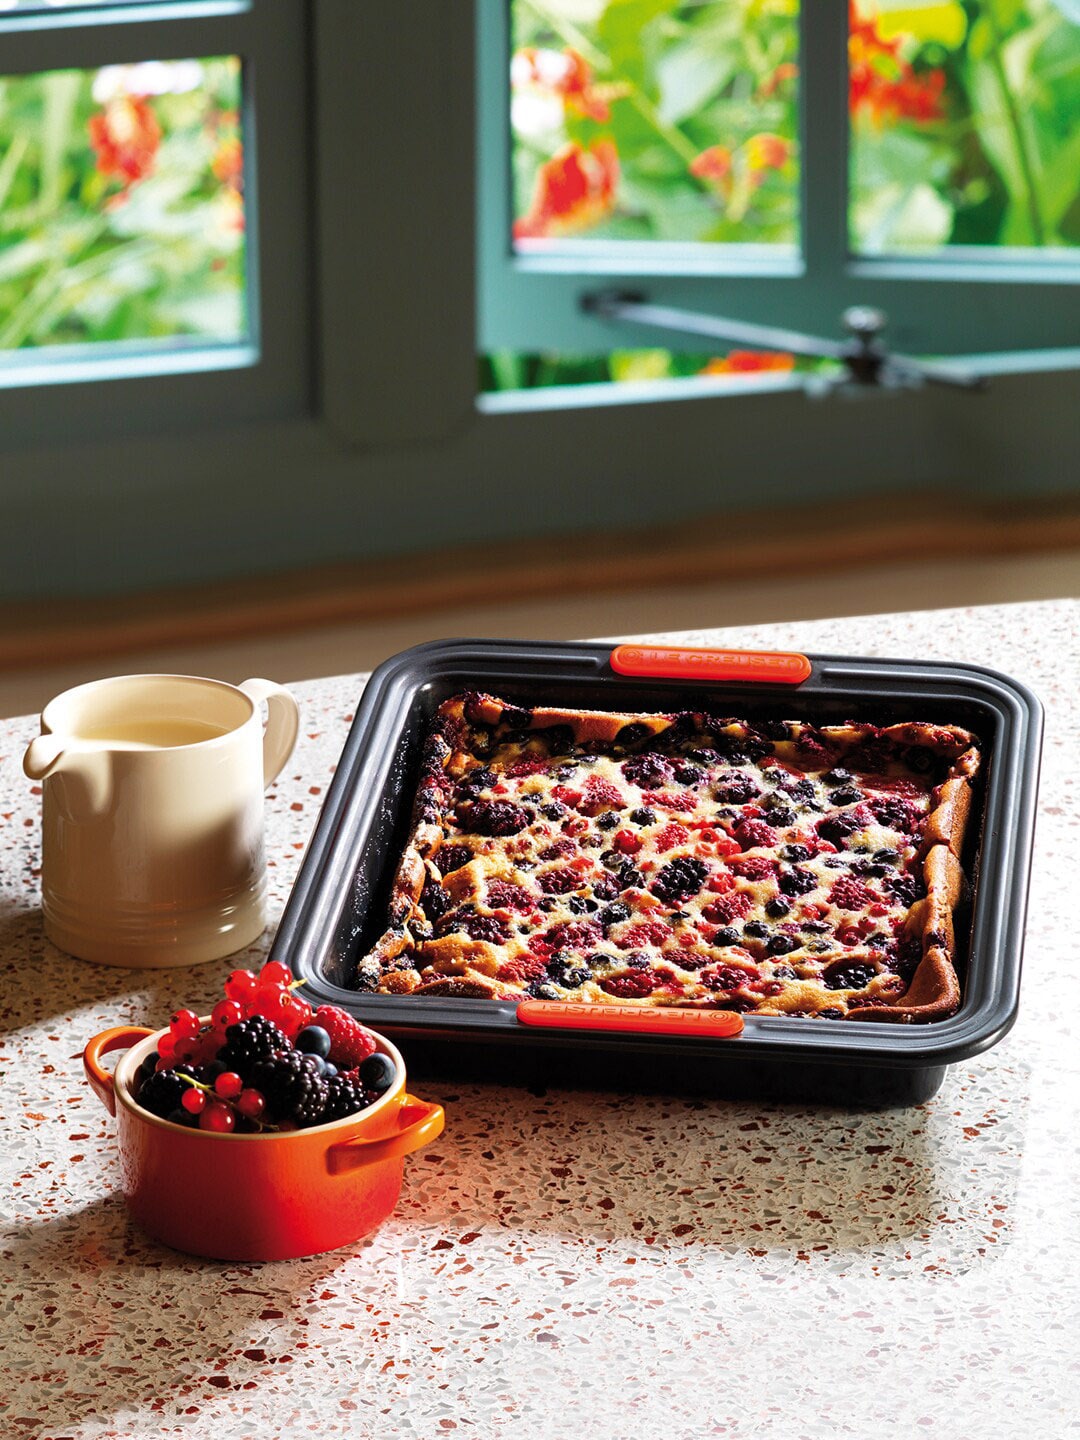 LE CREUSET Black Solid Square Cake Baking Tray Price in India